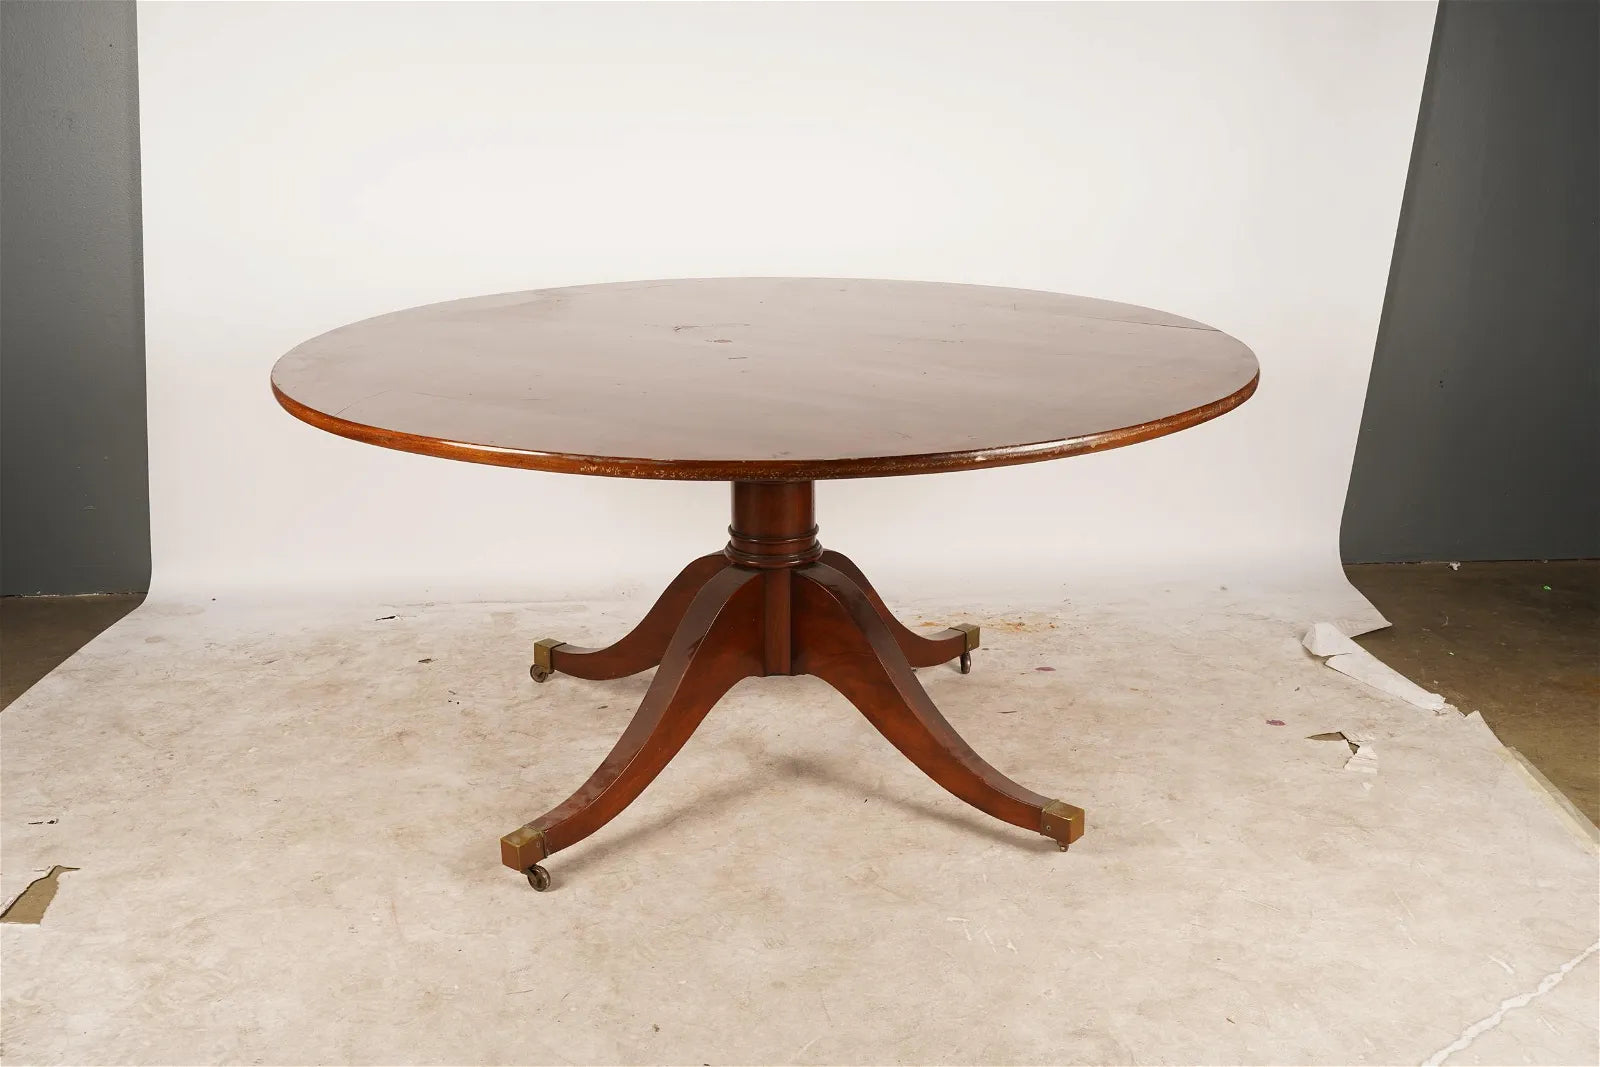 AF1-014:  EARLY 20th CENTURY ENGLISH REGENCY STYLE MAHOGANY 60" DIAMETER DINING TABLE